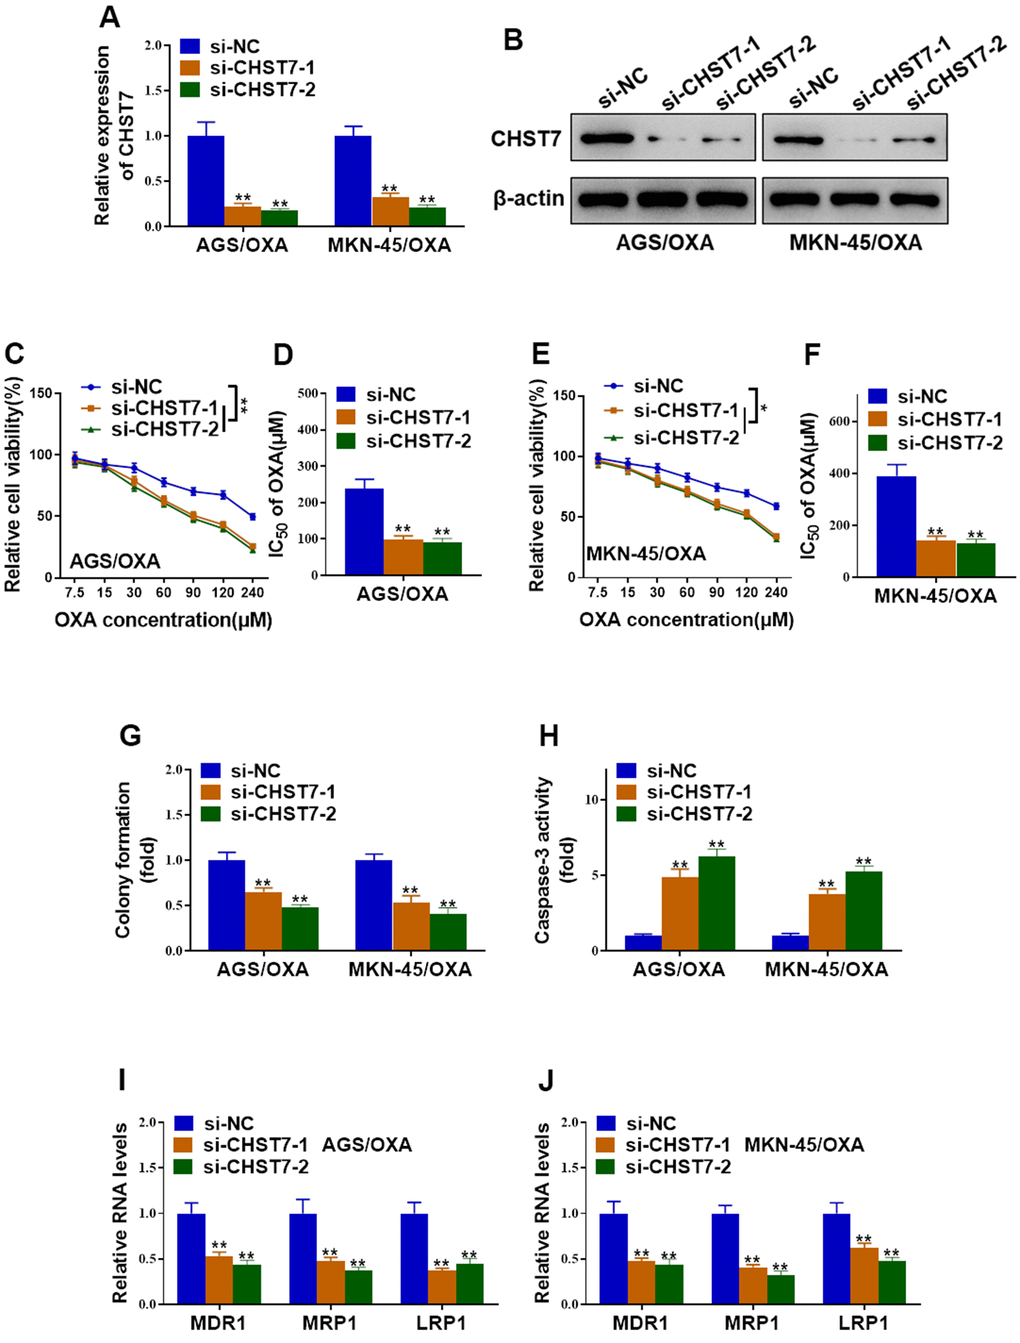 Silence of CHST7 resensitized OVA-resistant gastric cancer cells to oxaliplatin. (A, B) The knockdown efficiency of CHST7 in AGS/OXA and MKN-45/OXA cells transfected with CHST7 siRNAs (si-CHST7-1 and si-CHST7-2) or si-NC was validated by qRT-PCR and western blot. (C–F) Cell viability and the IC50 of oxaliplatin in AGS/OXA and MKN-45/OXA cells transfected with CHST7 siRNAs or si-NC were determined by CCK-8 assay. (G) Colony formation assay showed knockdown of CHST7 decreased cell survival of AGS/OXA and MKN-45/OXA cells exposed to 15μM oxaliplatin. (H) Caspase-3 activity assay indicated that knockdown of CHST7 increased apoptosis of AGS/OXA and MKN-45/OXA cells exposed to 15μM oxaliplatin. (I, J) qRT-PCR indicated that silence of CHST7 decreased expression levels of drug-resistant genes (MDR1, MRP1, LRP1) in AGS/OXA and MKN-45/OXA cells. Two-way ANOVA for (C, E) Student’s t-test for others.